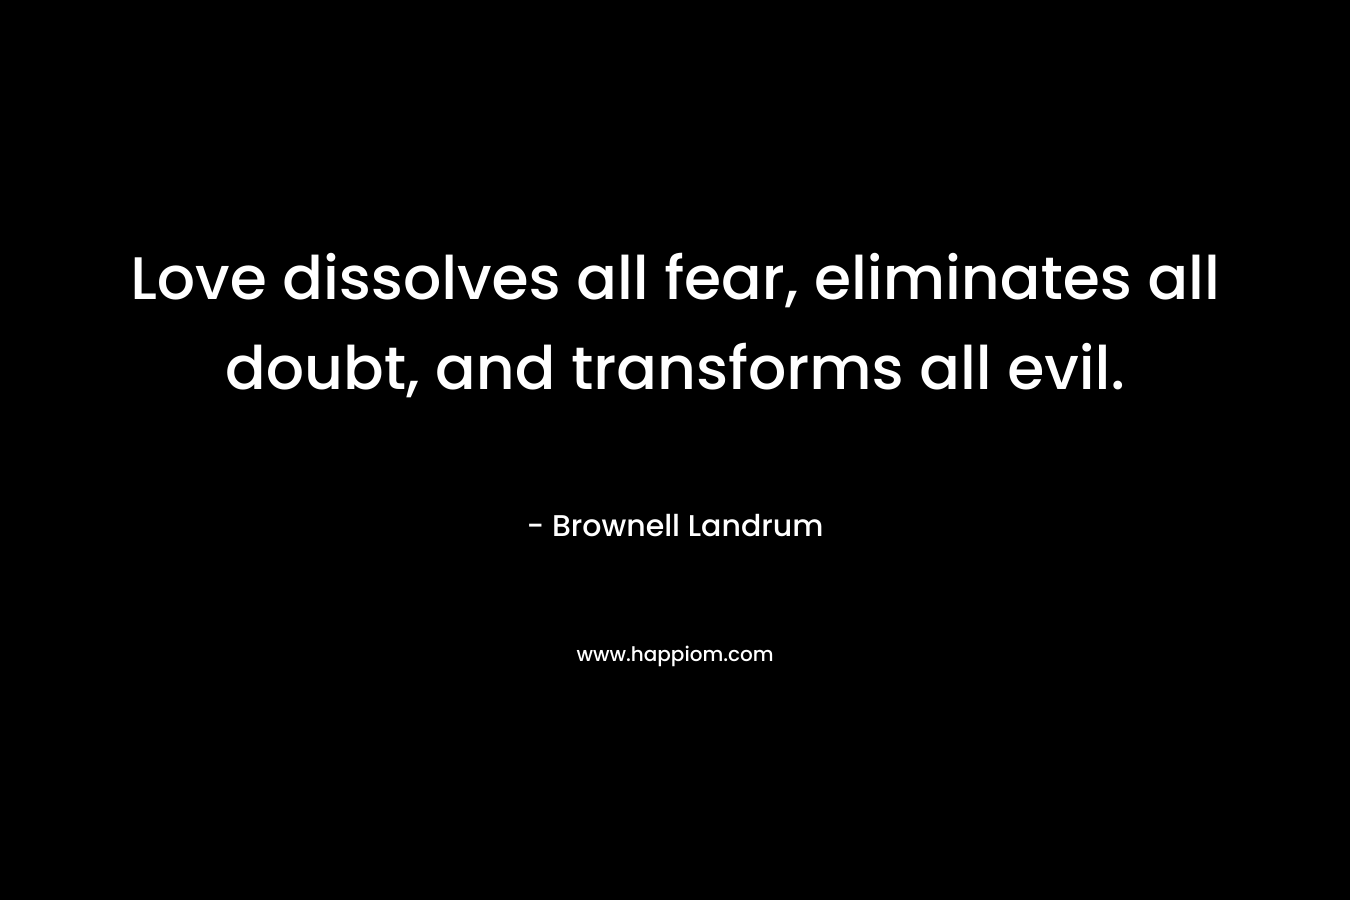 Love dissolves all fear, eliminates all doubt, and transforms all evil. – Brownell Landrum